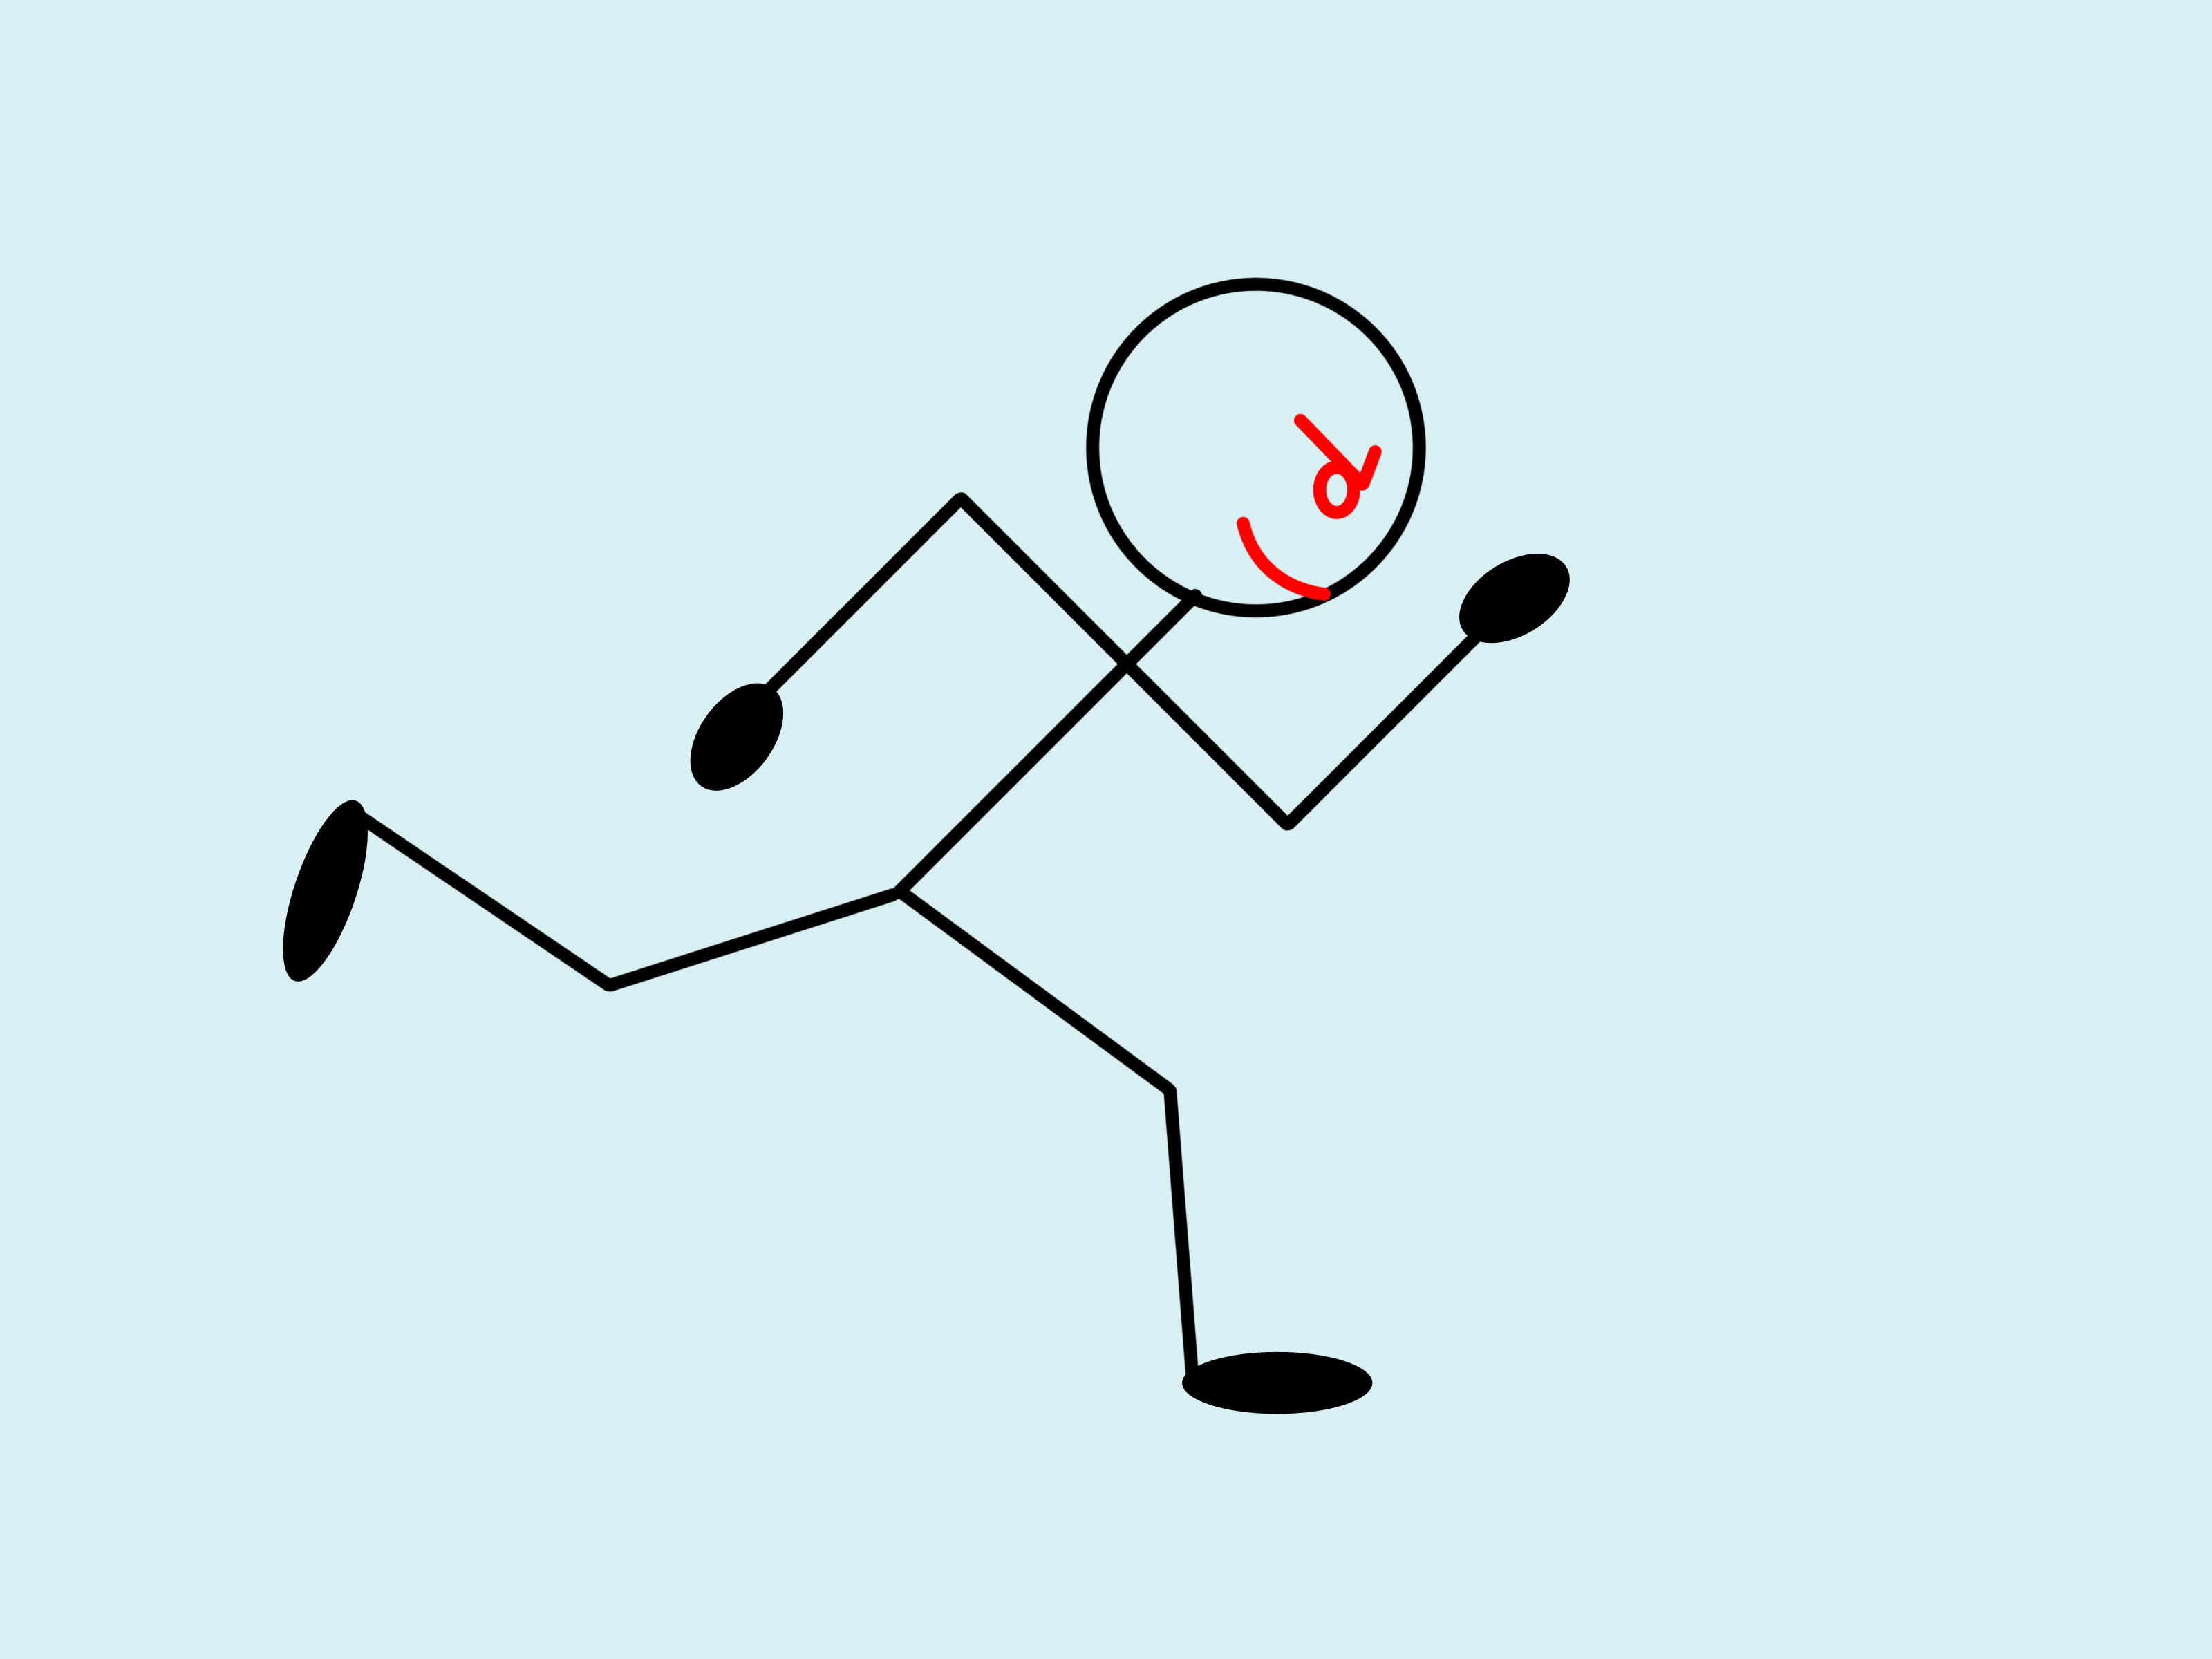 Running Stick Figure Images & Pictures - Becuo